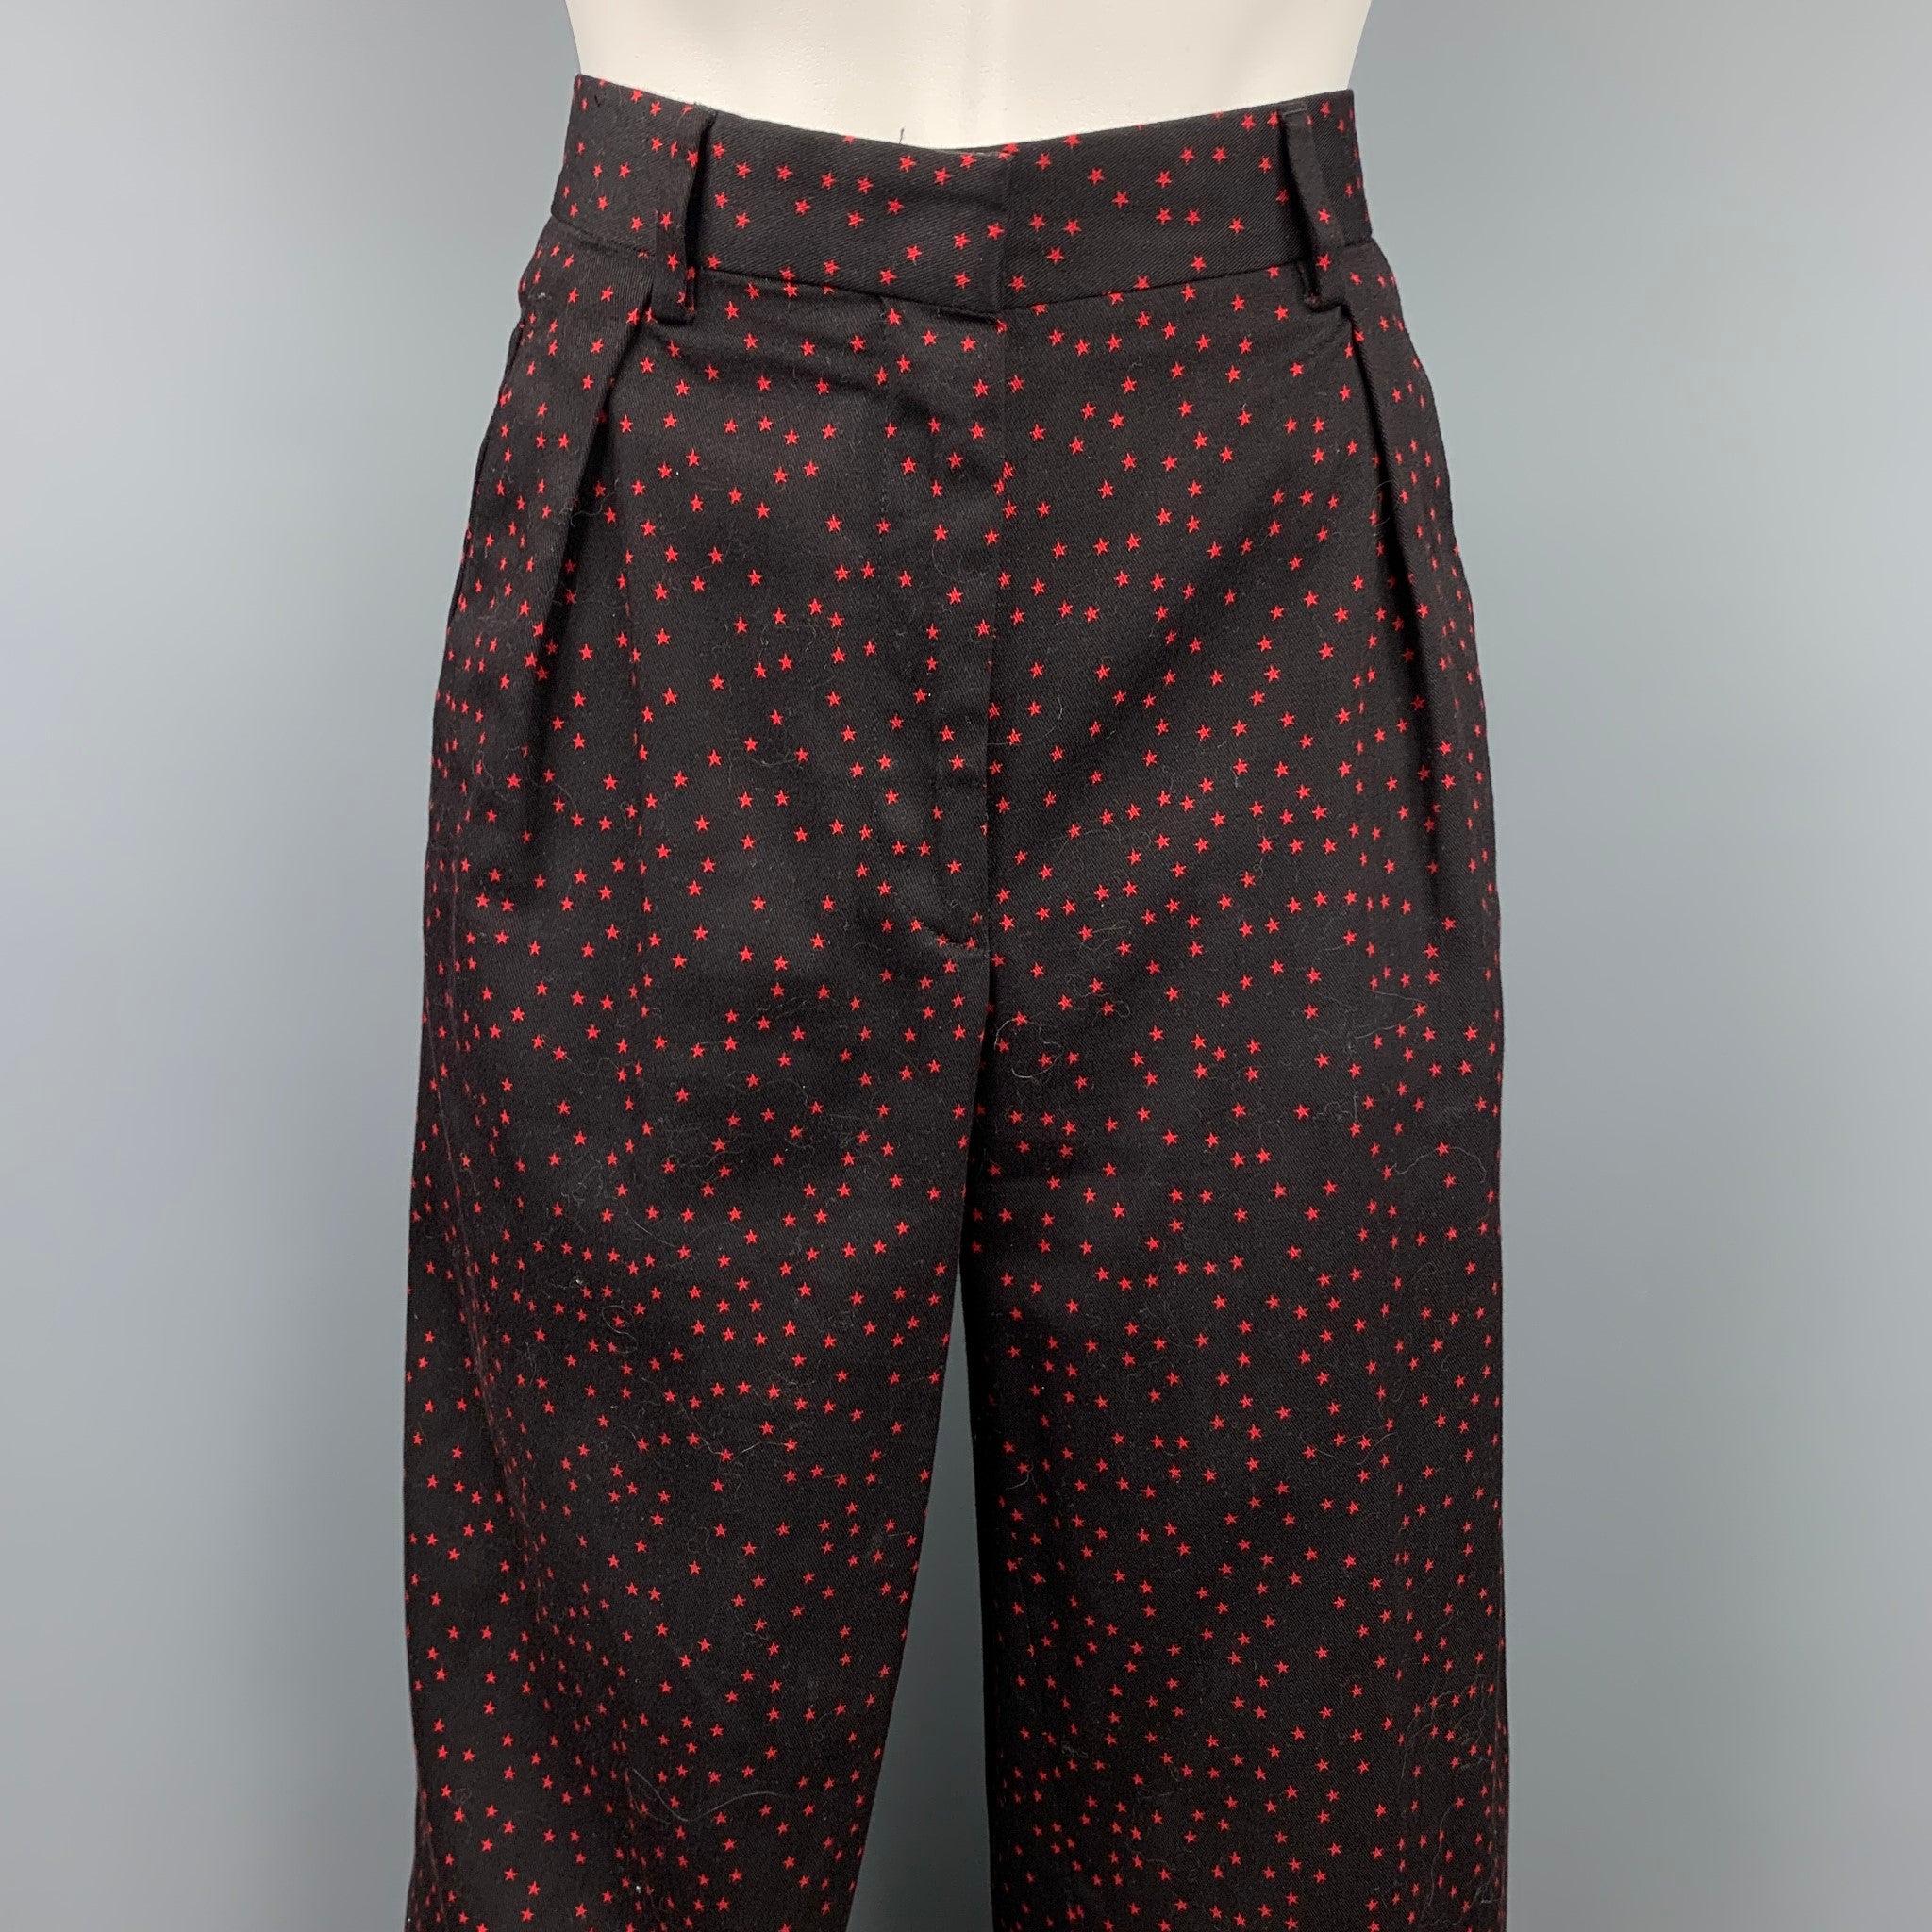 DRIES VAN NOTEN dress pants comes in a black & red star print cotton featuring a wide leg style, pleated, front tab, and a zip fly closure.
Very Good
Pre-Owned Condition. 

Marked:   36 

Measurements: 
  Waist: 32 inches  Rise: 11 inches Inseam: 25